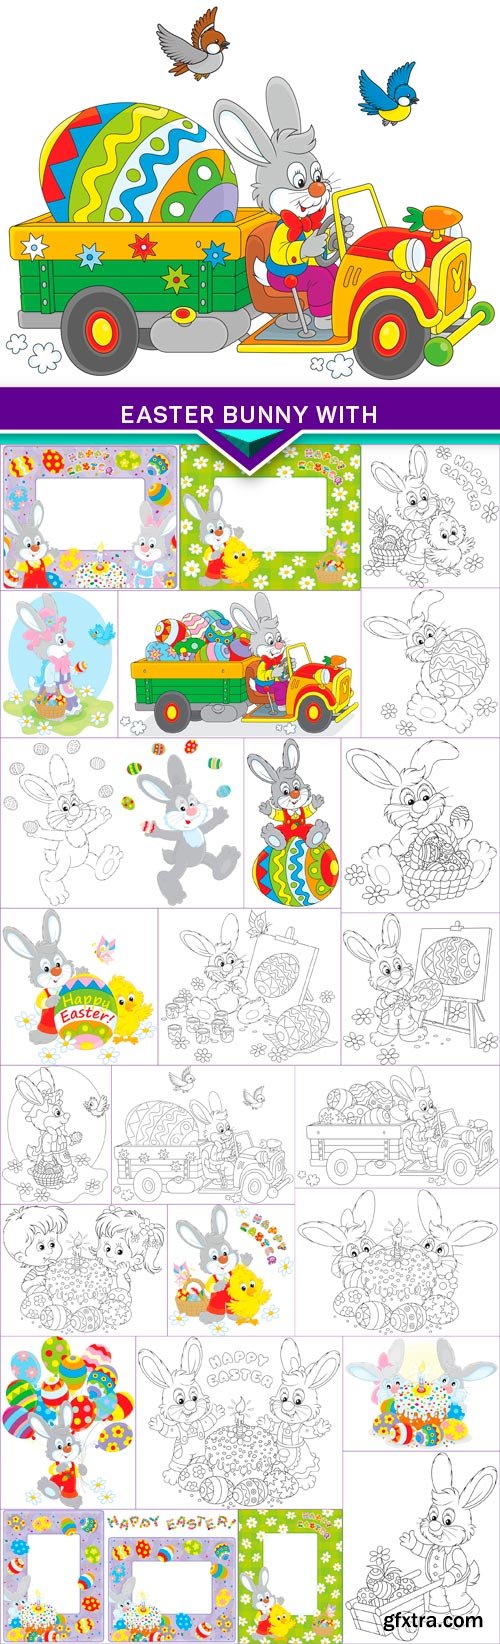 Easter bunny with Easter eggs 25x EPS